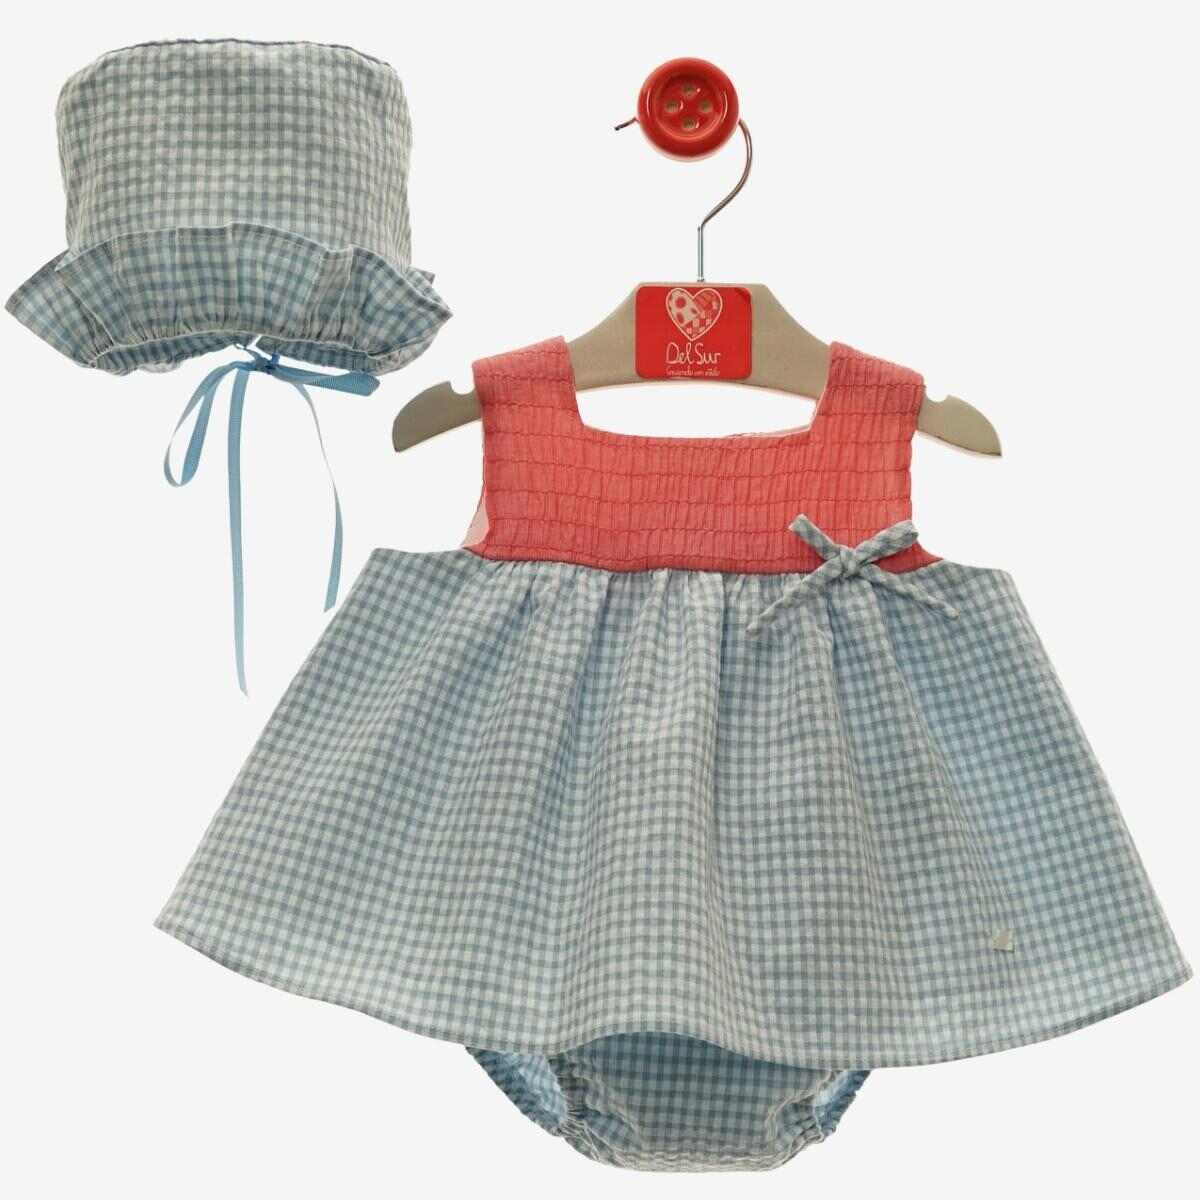 CHECKERED DRESS WITH MATCHING BONNET AND BLOOMER DELSUR - 2